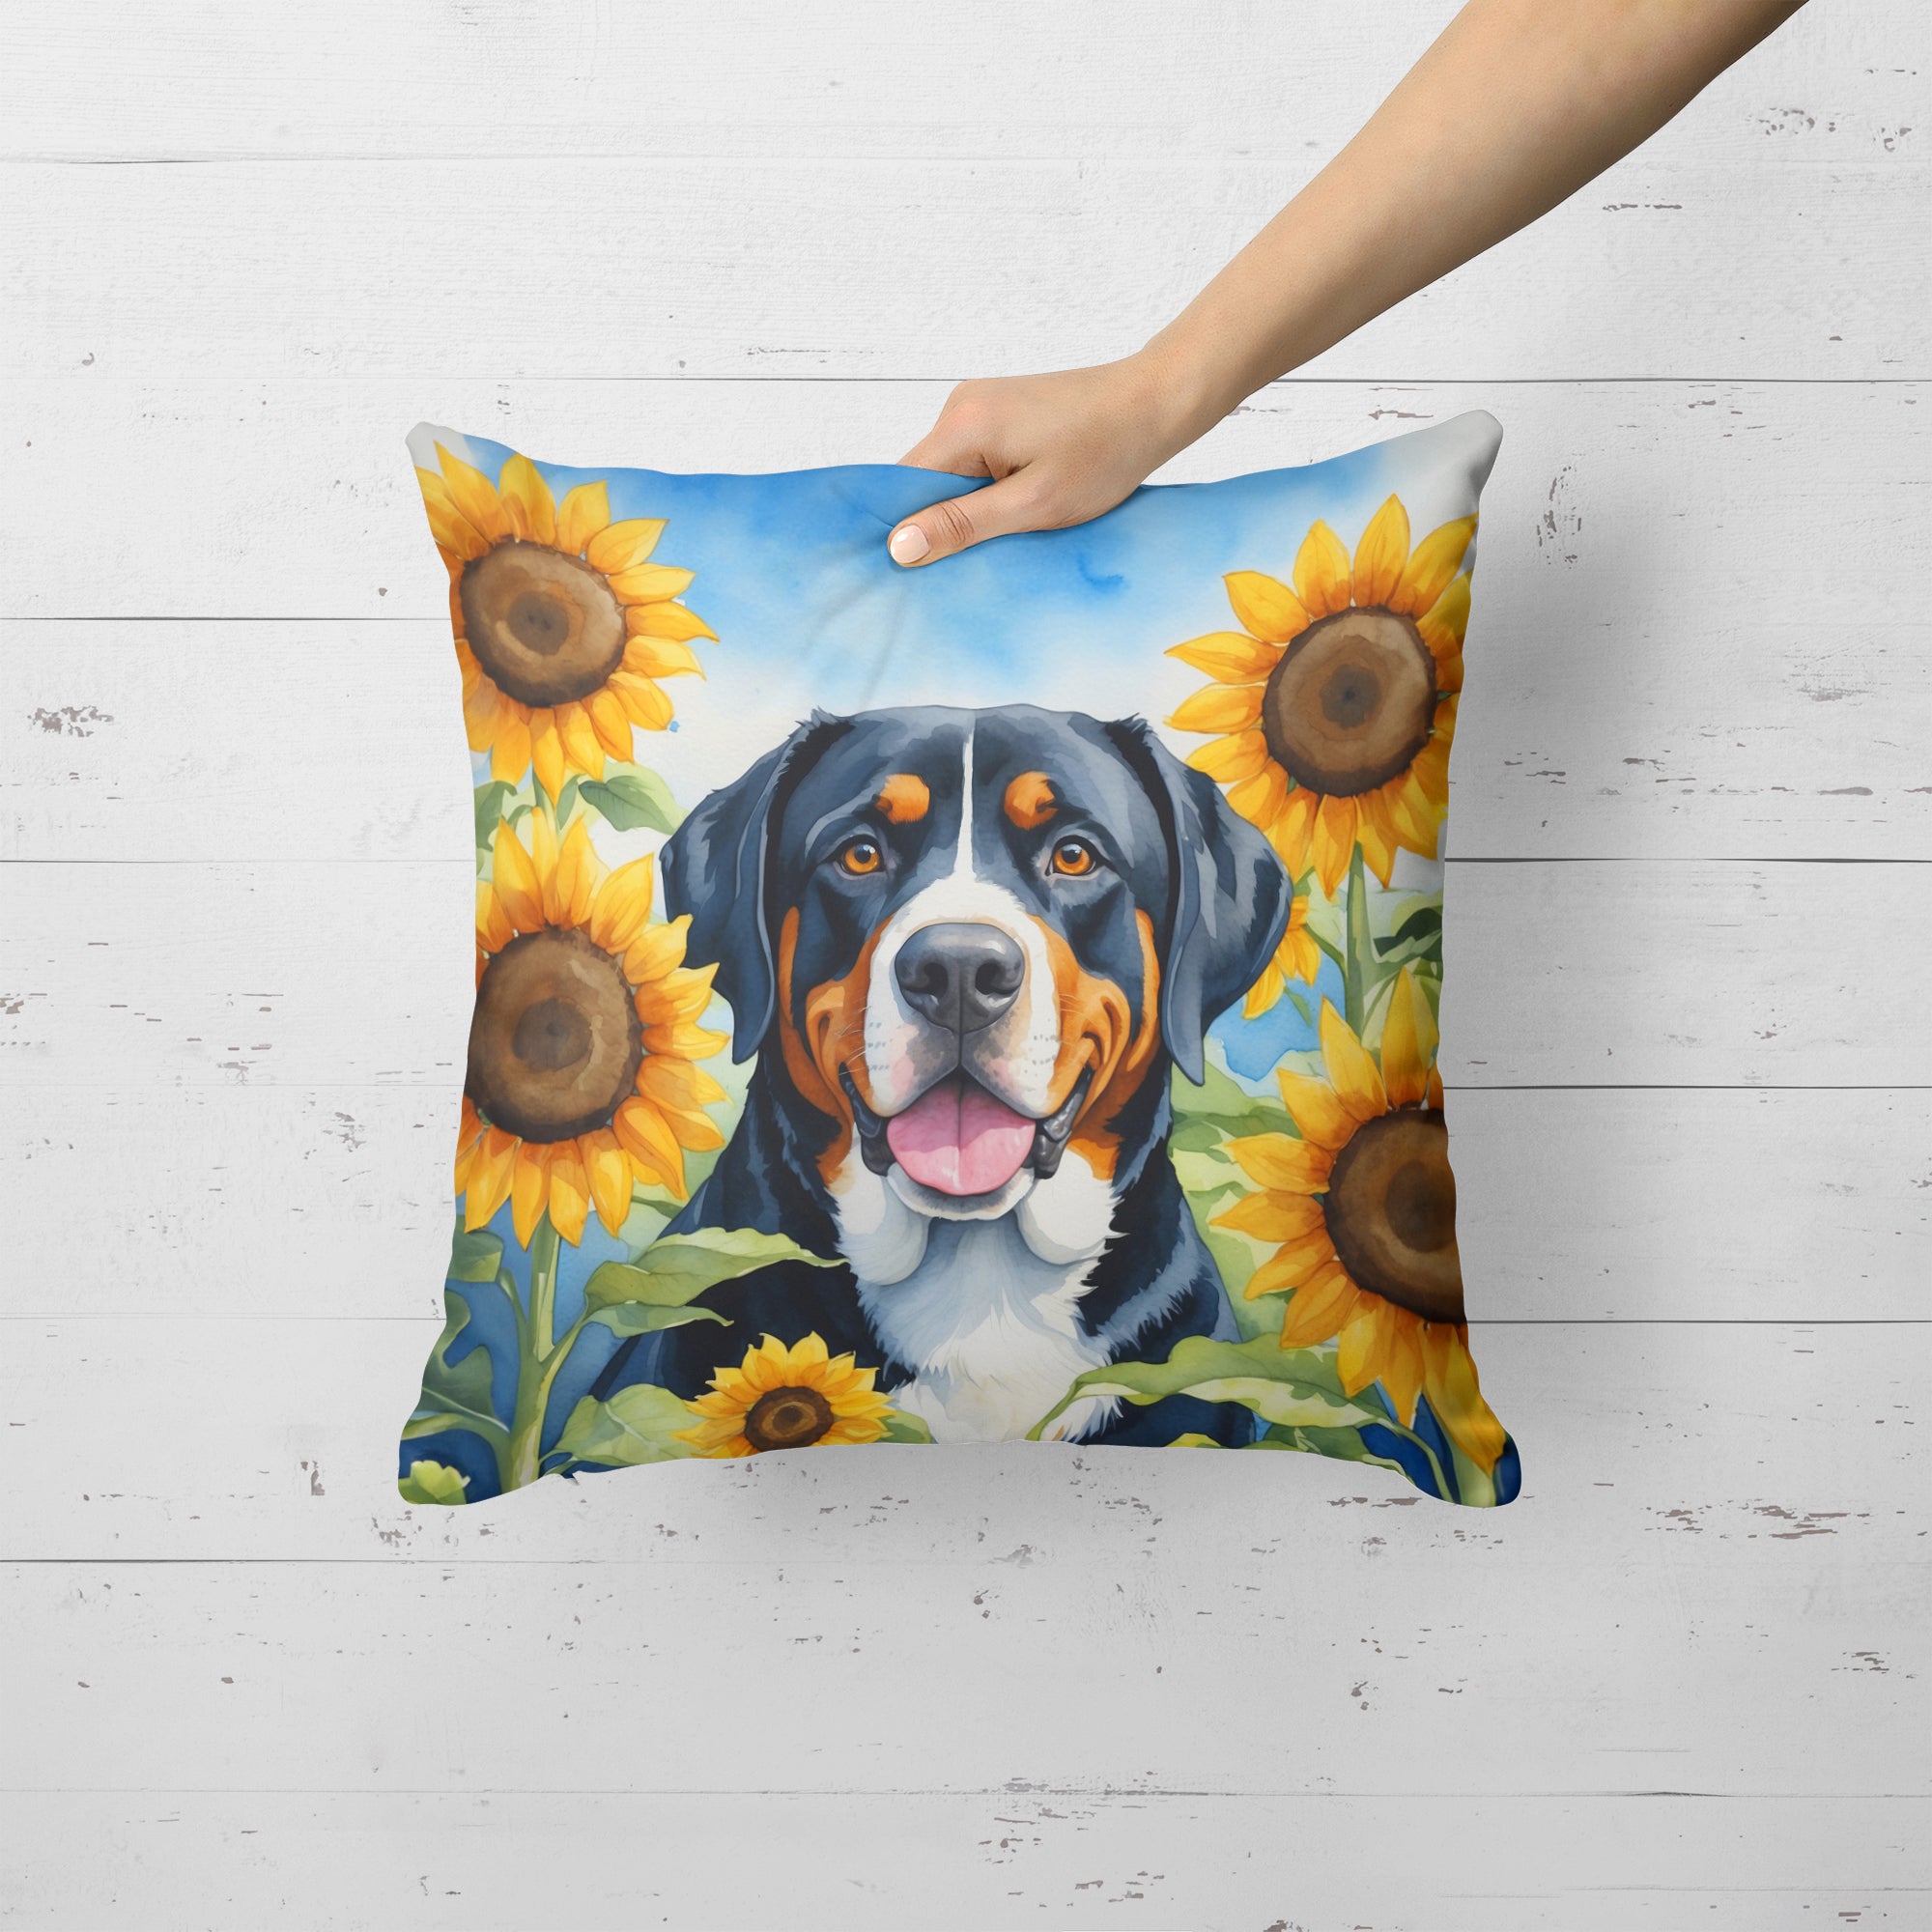 Buy this Greater Swiss Mountain Dog in Sunflowers Throw Pillow